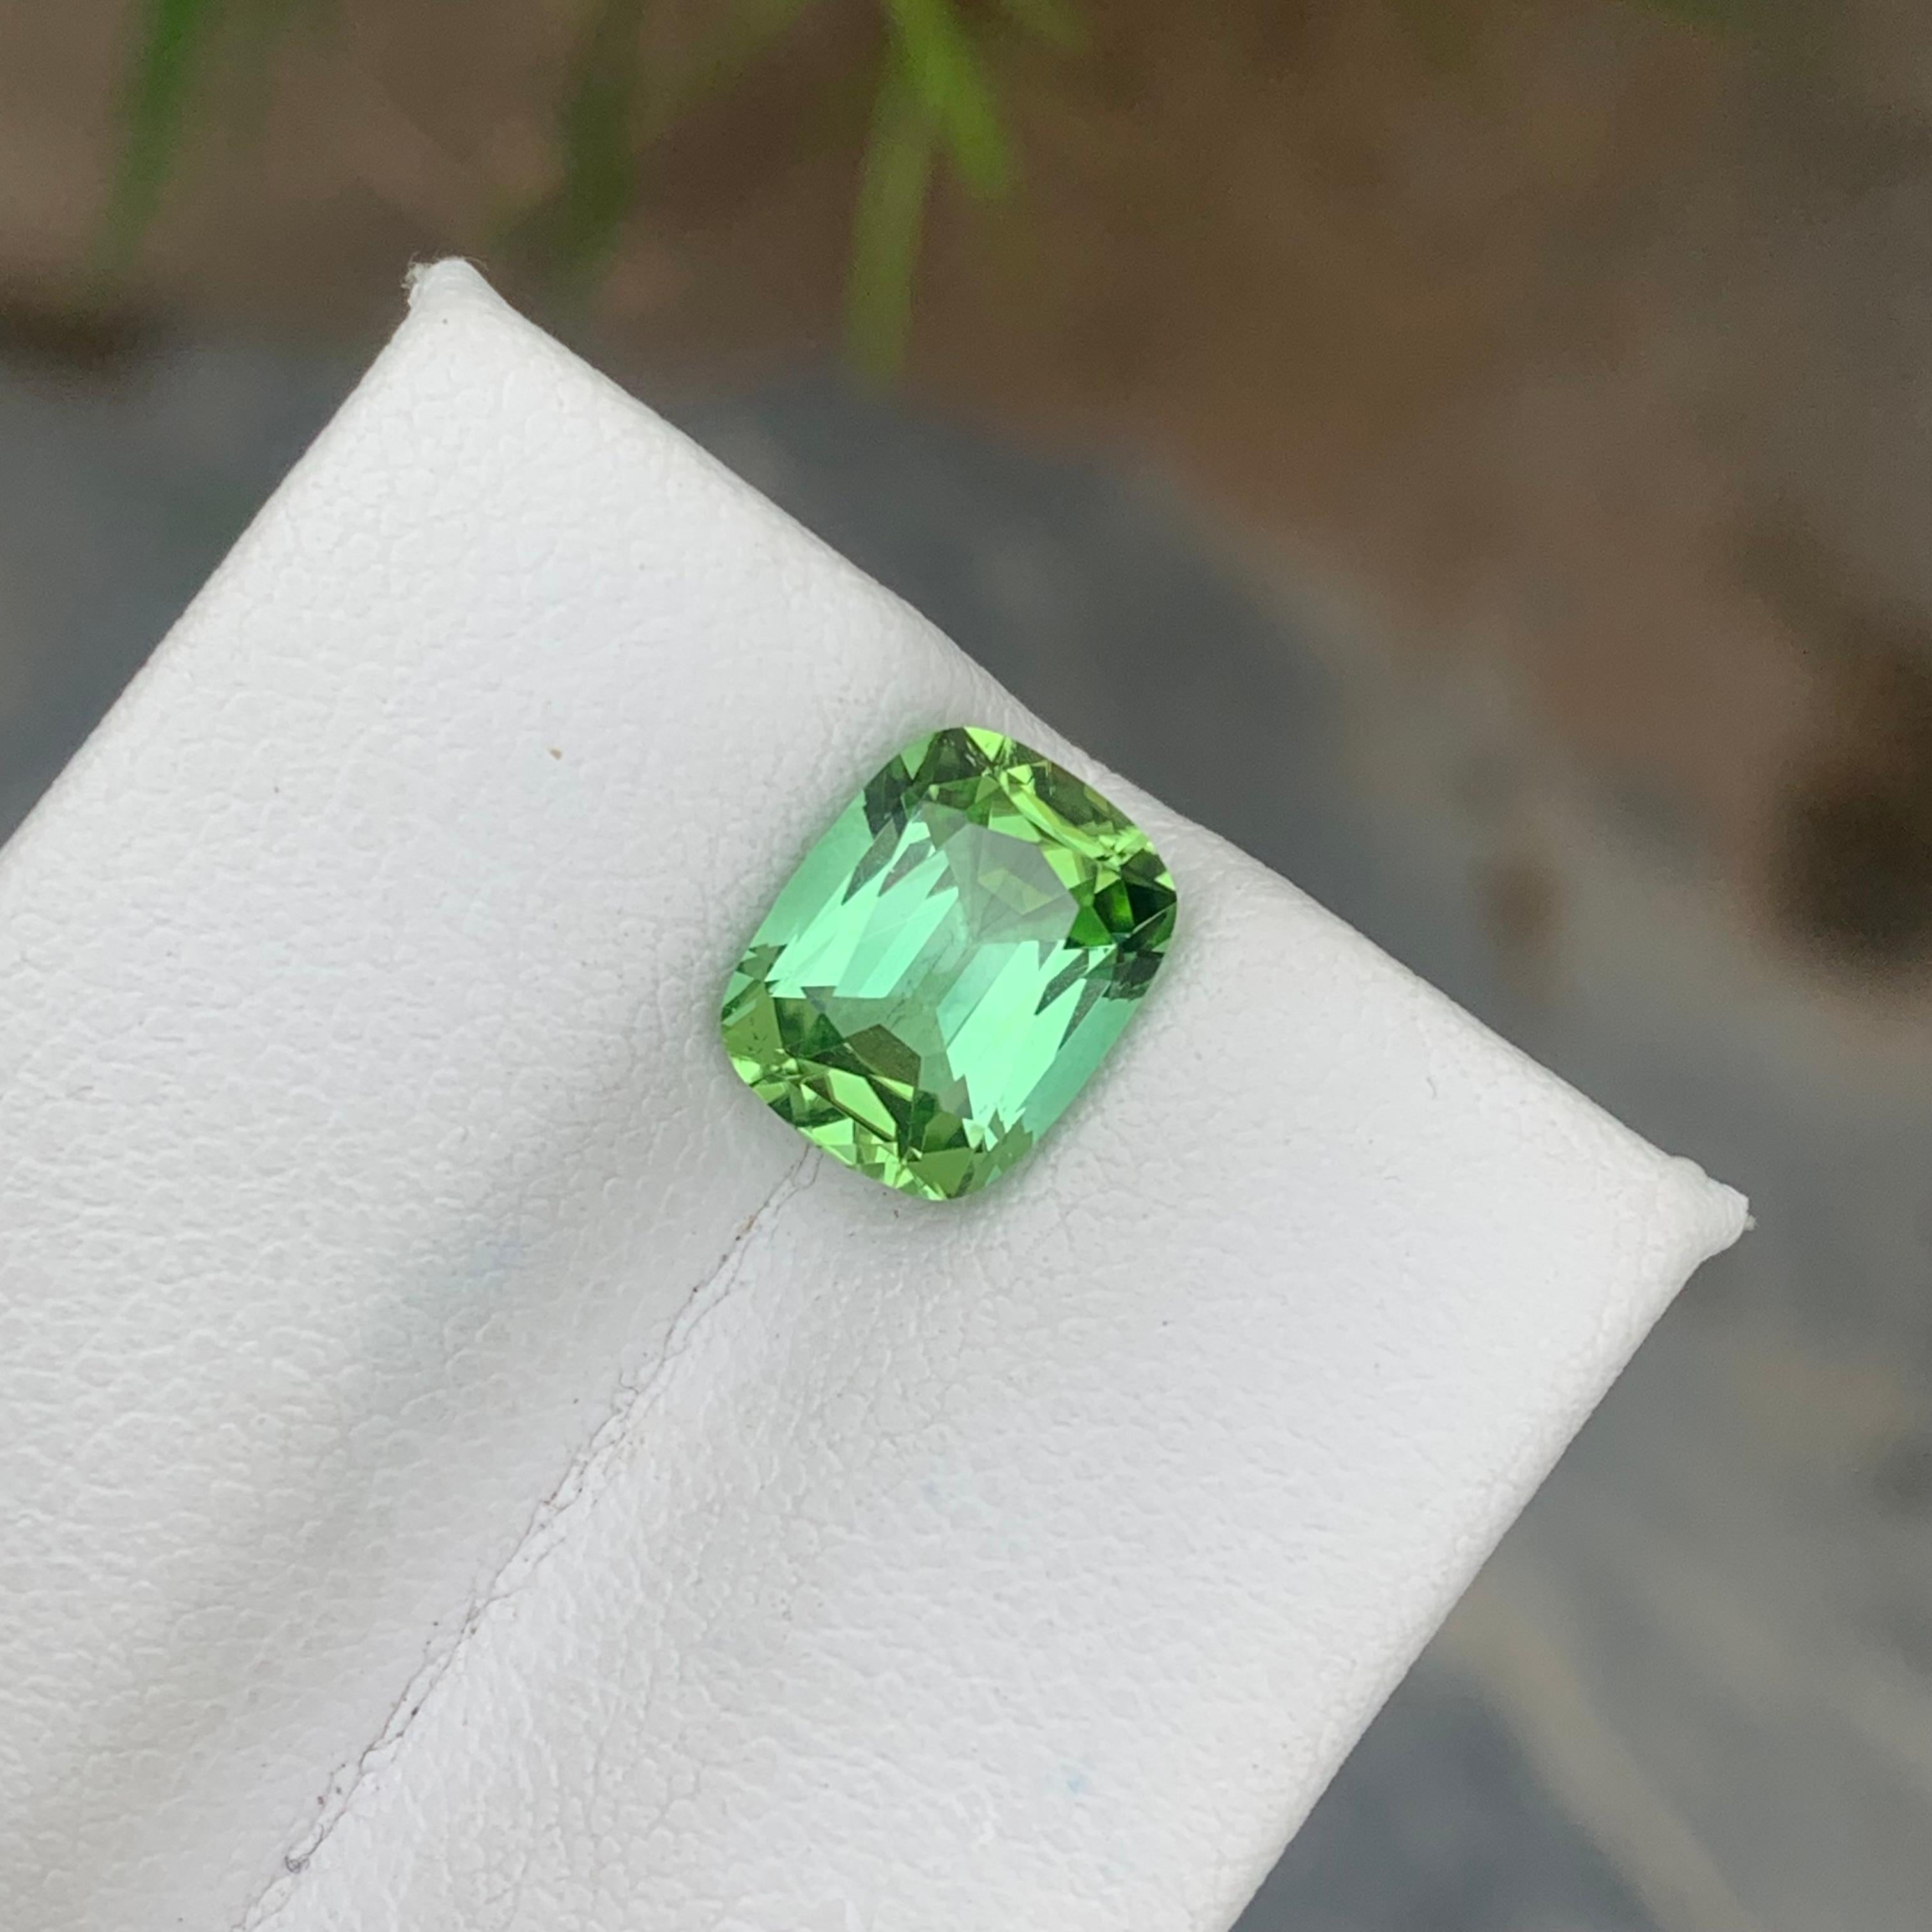 Stunning 2.65 Carat Natural Loose Tourmaline Ring Cushion Cut From Afghanistan For Sale 1